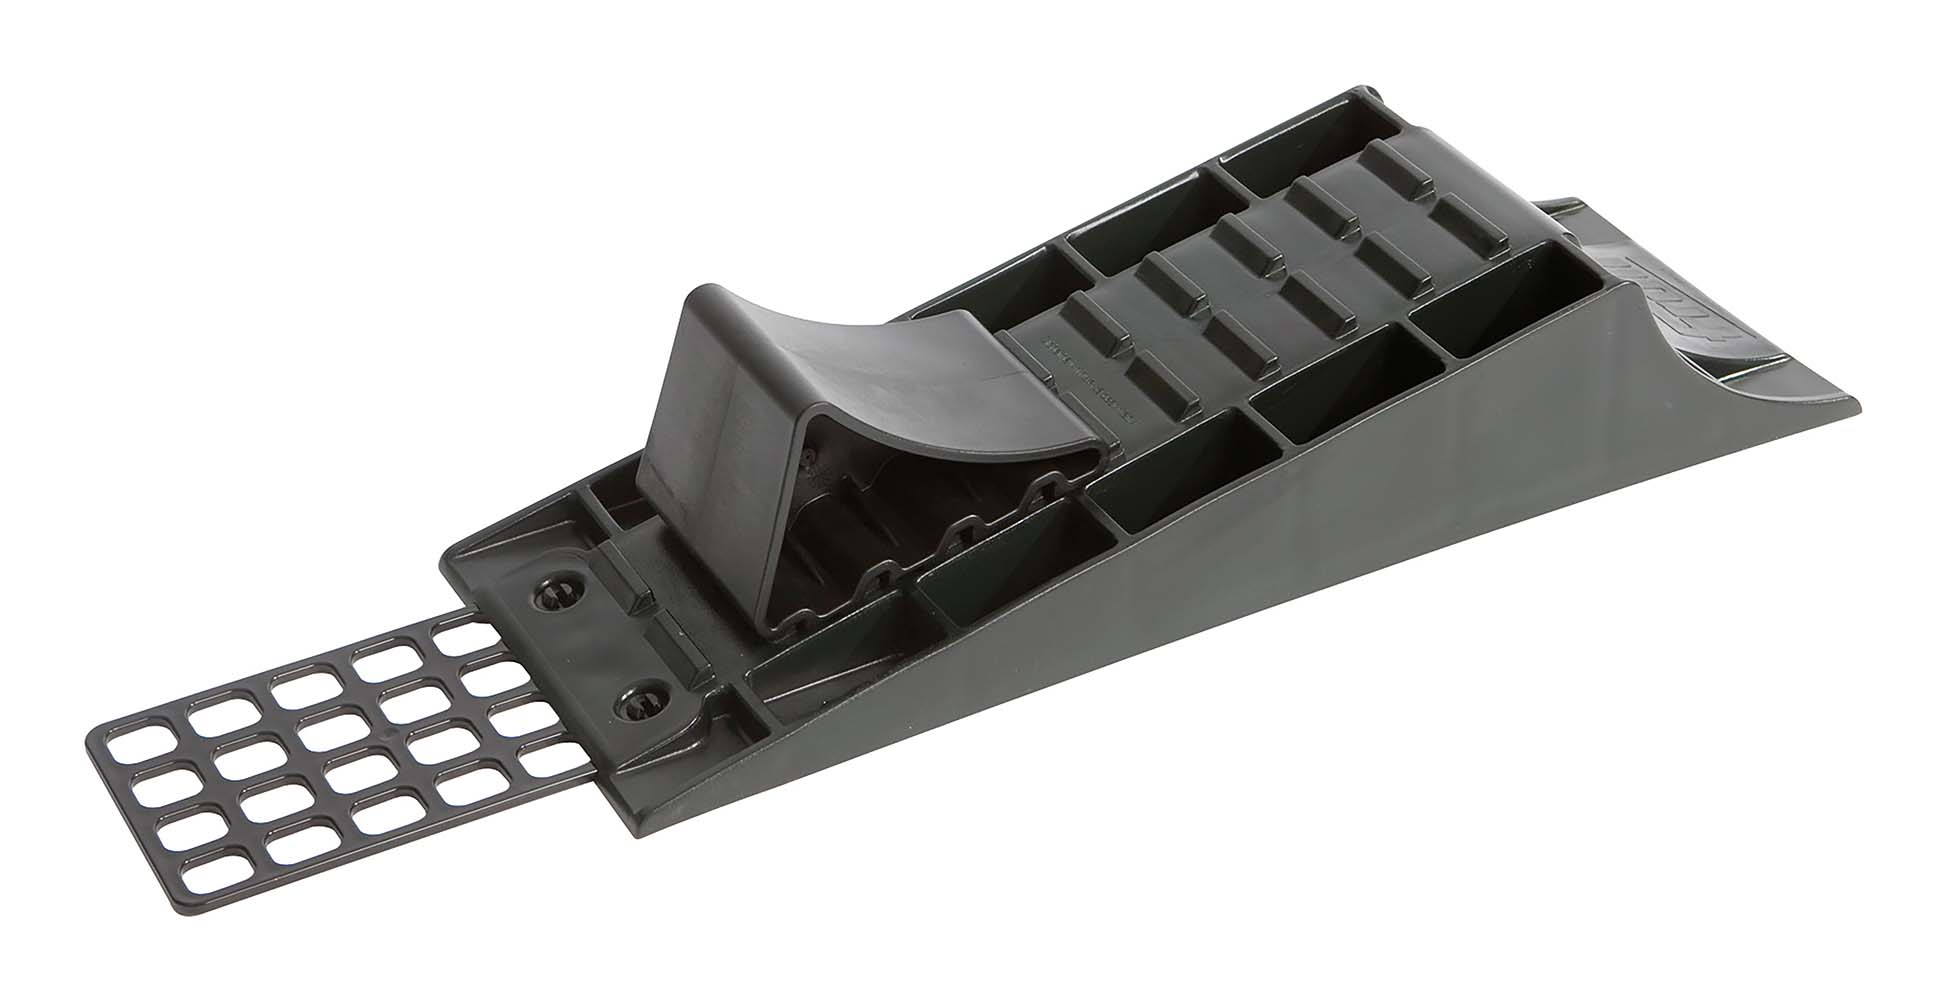 5324356 A 3 part caravan or camper leveller. This leveller has a handy ramp and a stopper, also making it easy to use. Ideal for positioning and levelling the caravan. The extra strong and fibre reinforced leveller can be used for a caravan up to 8000 kilograms.